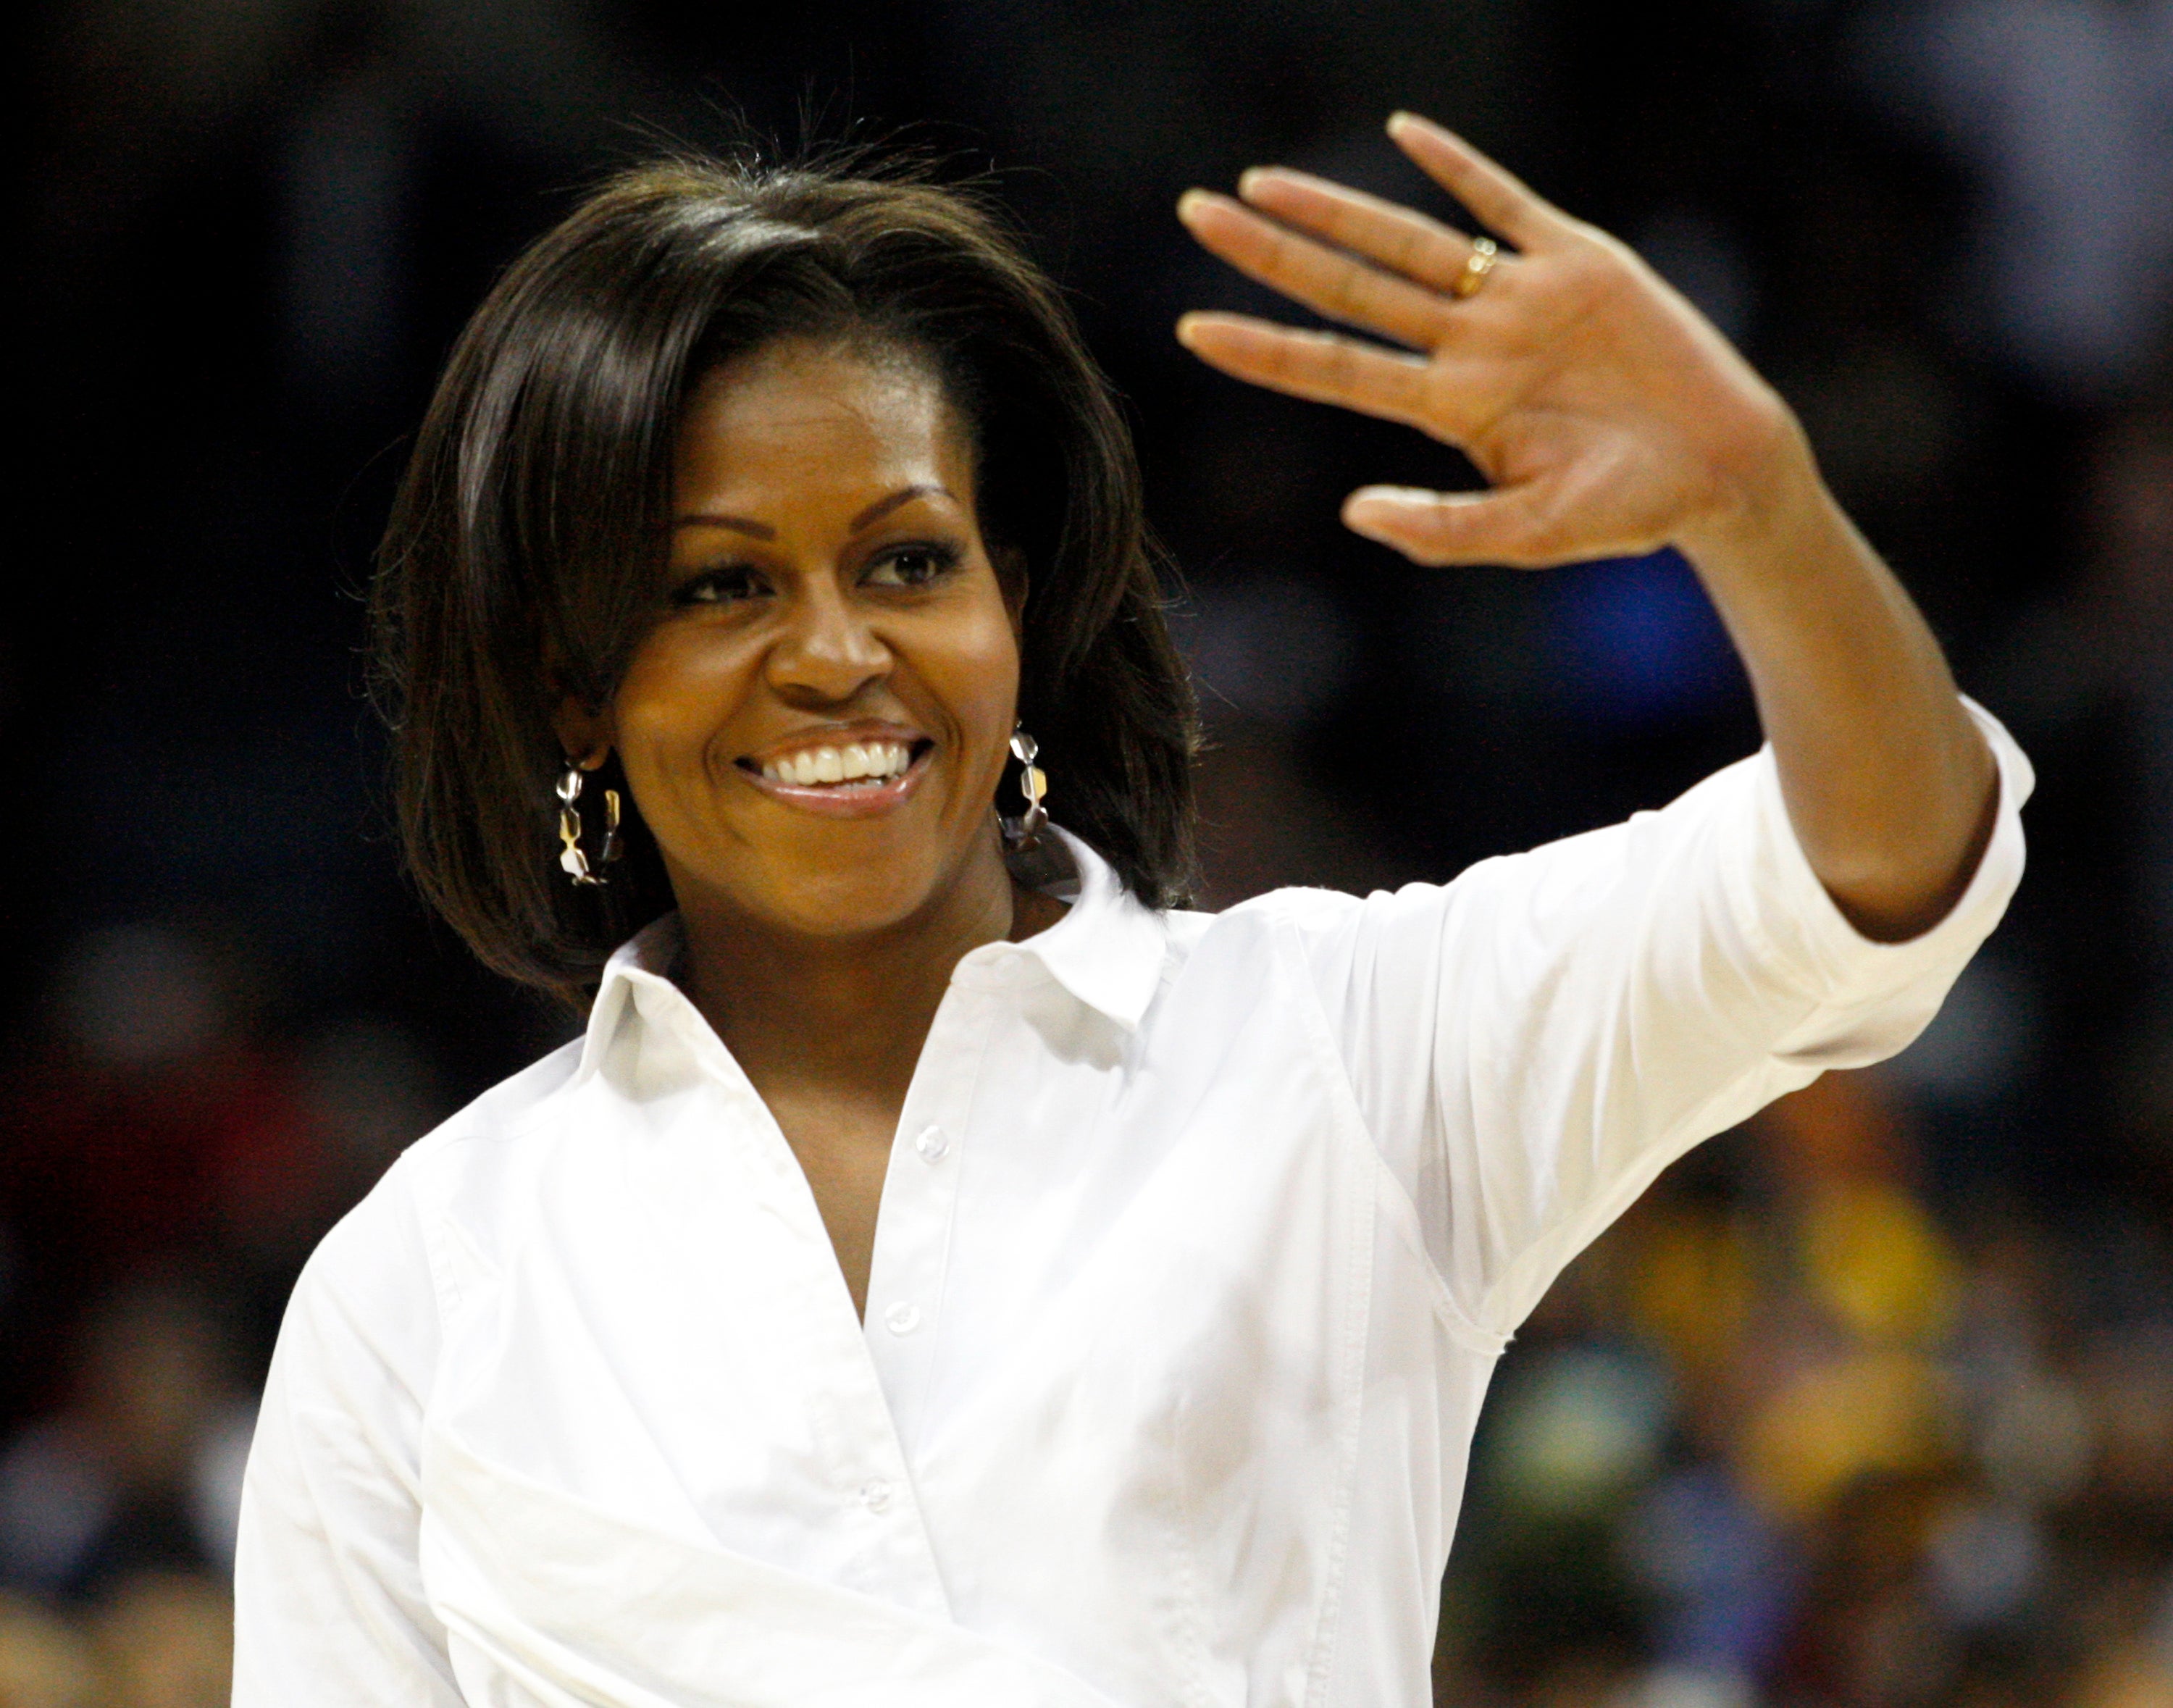 FLOTUS Scheduled for 3 Commencement Speeches